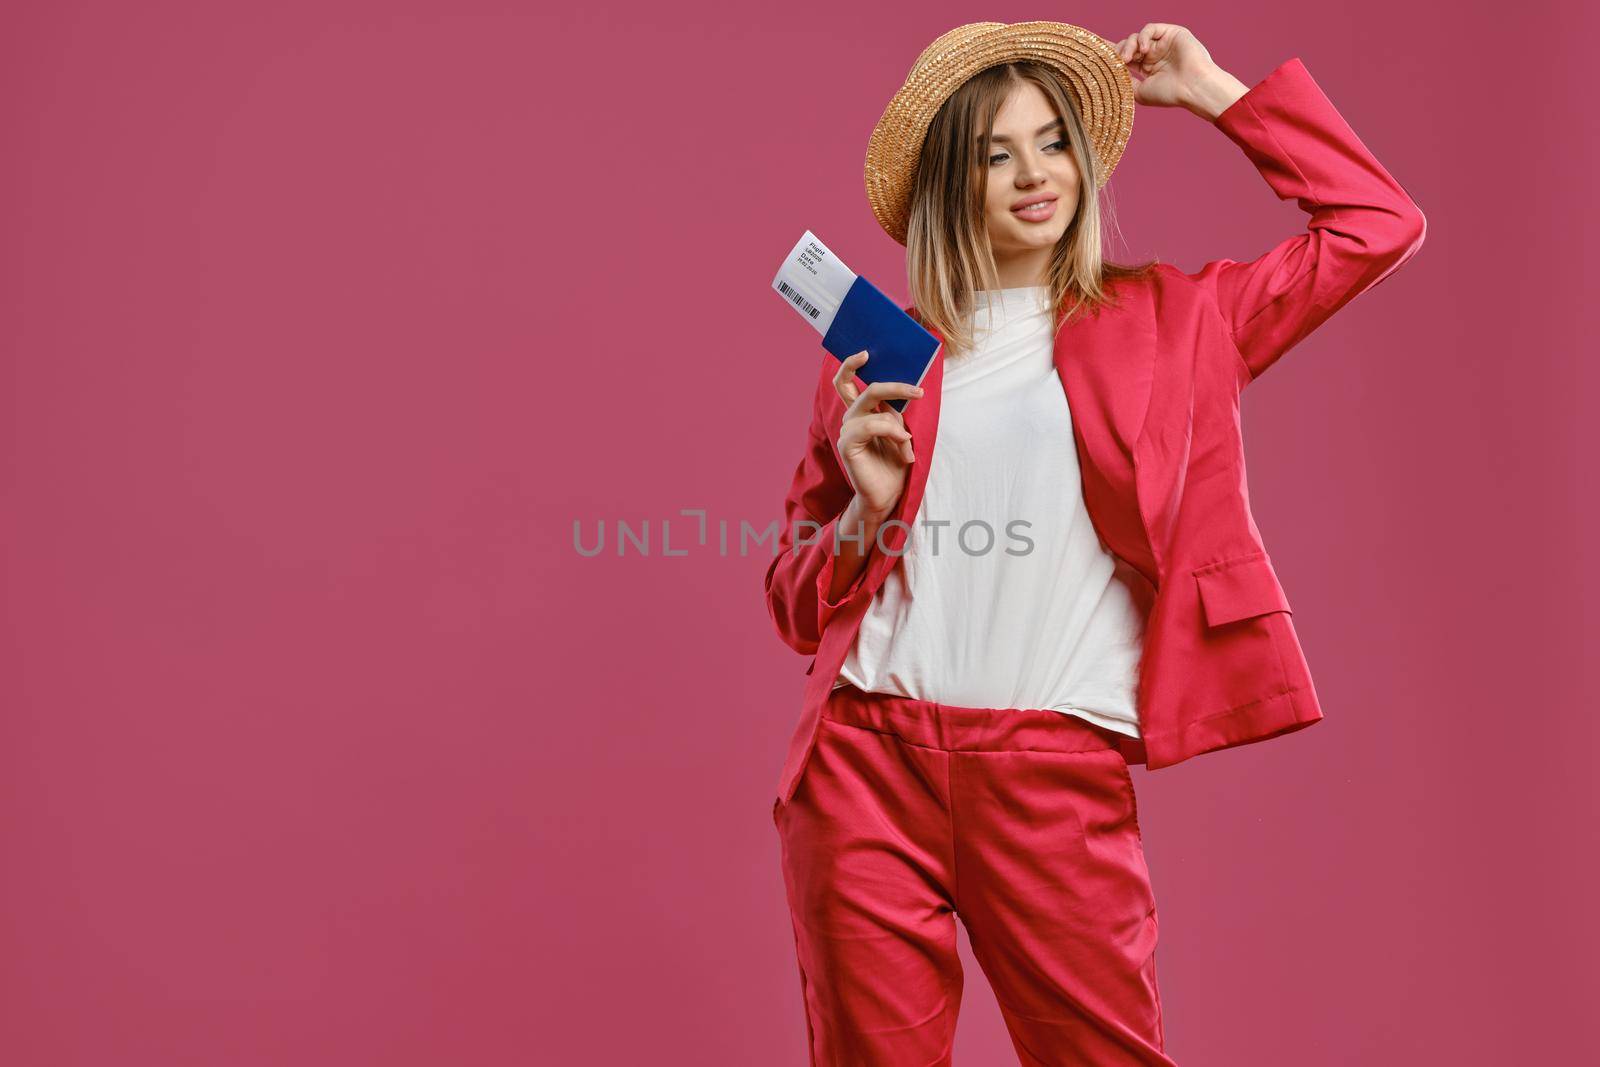 Charming blonde female in straw hat, white blouse and red pantsuit. Smiling, touching headdress, holding passport and ticket while posing on pink background. Travelling concept. Close-up, copy space